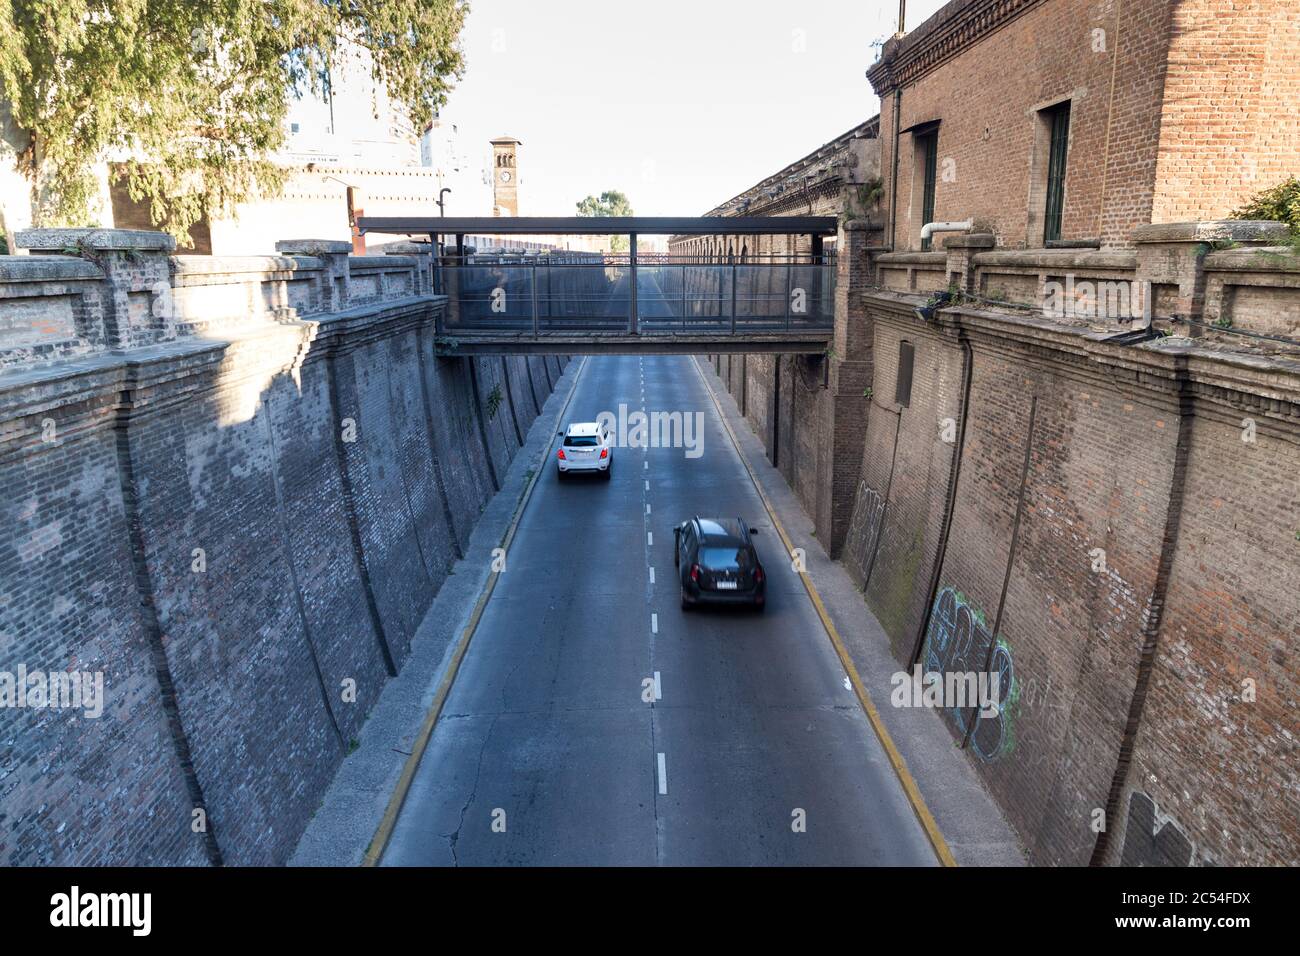 ROSARIO, ARGENTINA - JULY 6, 2019: View of the Arturo Illia tunnel in the centre of the city. An old bricks construction of english style. Stock Photo